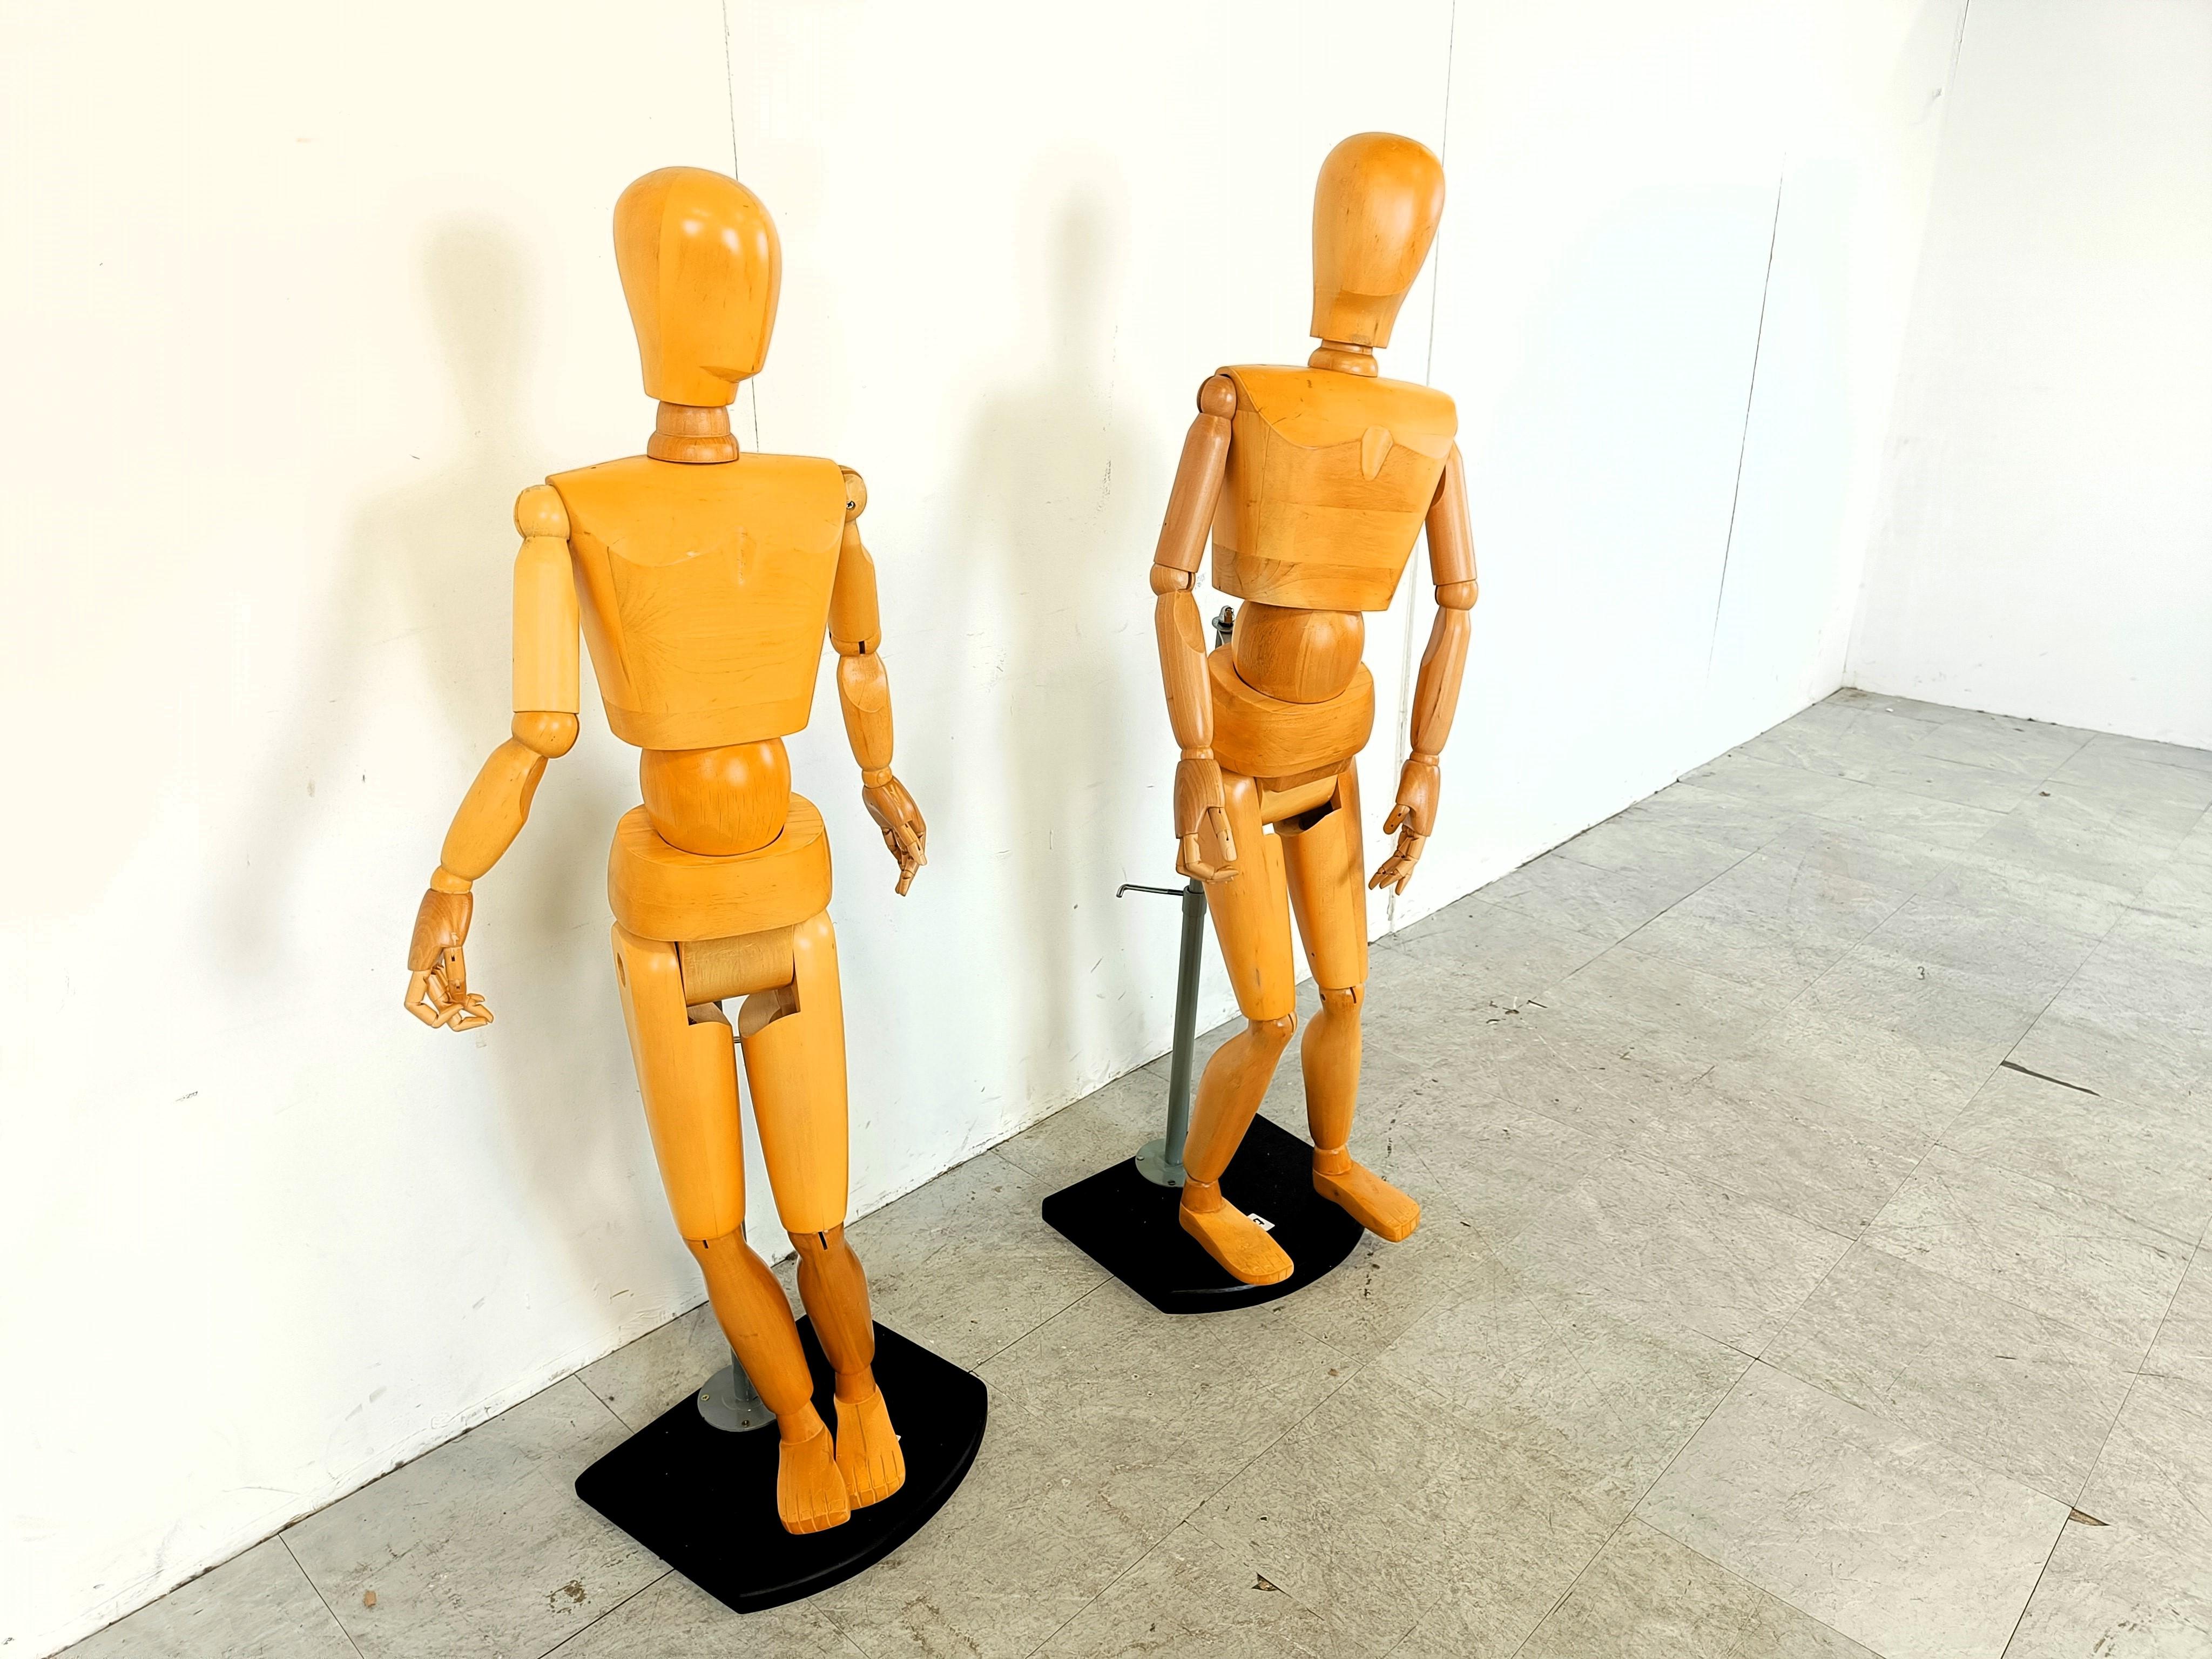 High quality wooden articulated artistic Lay Figures.

These life size mannequins are made with great care and have a lot of positioning possibilities.

What is remarkable, is the engineering around the belly area, allowing these figure to bend in